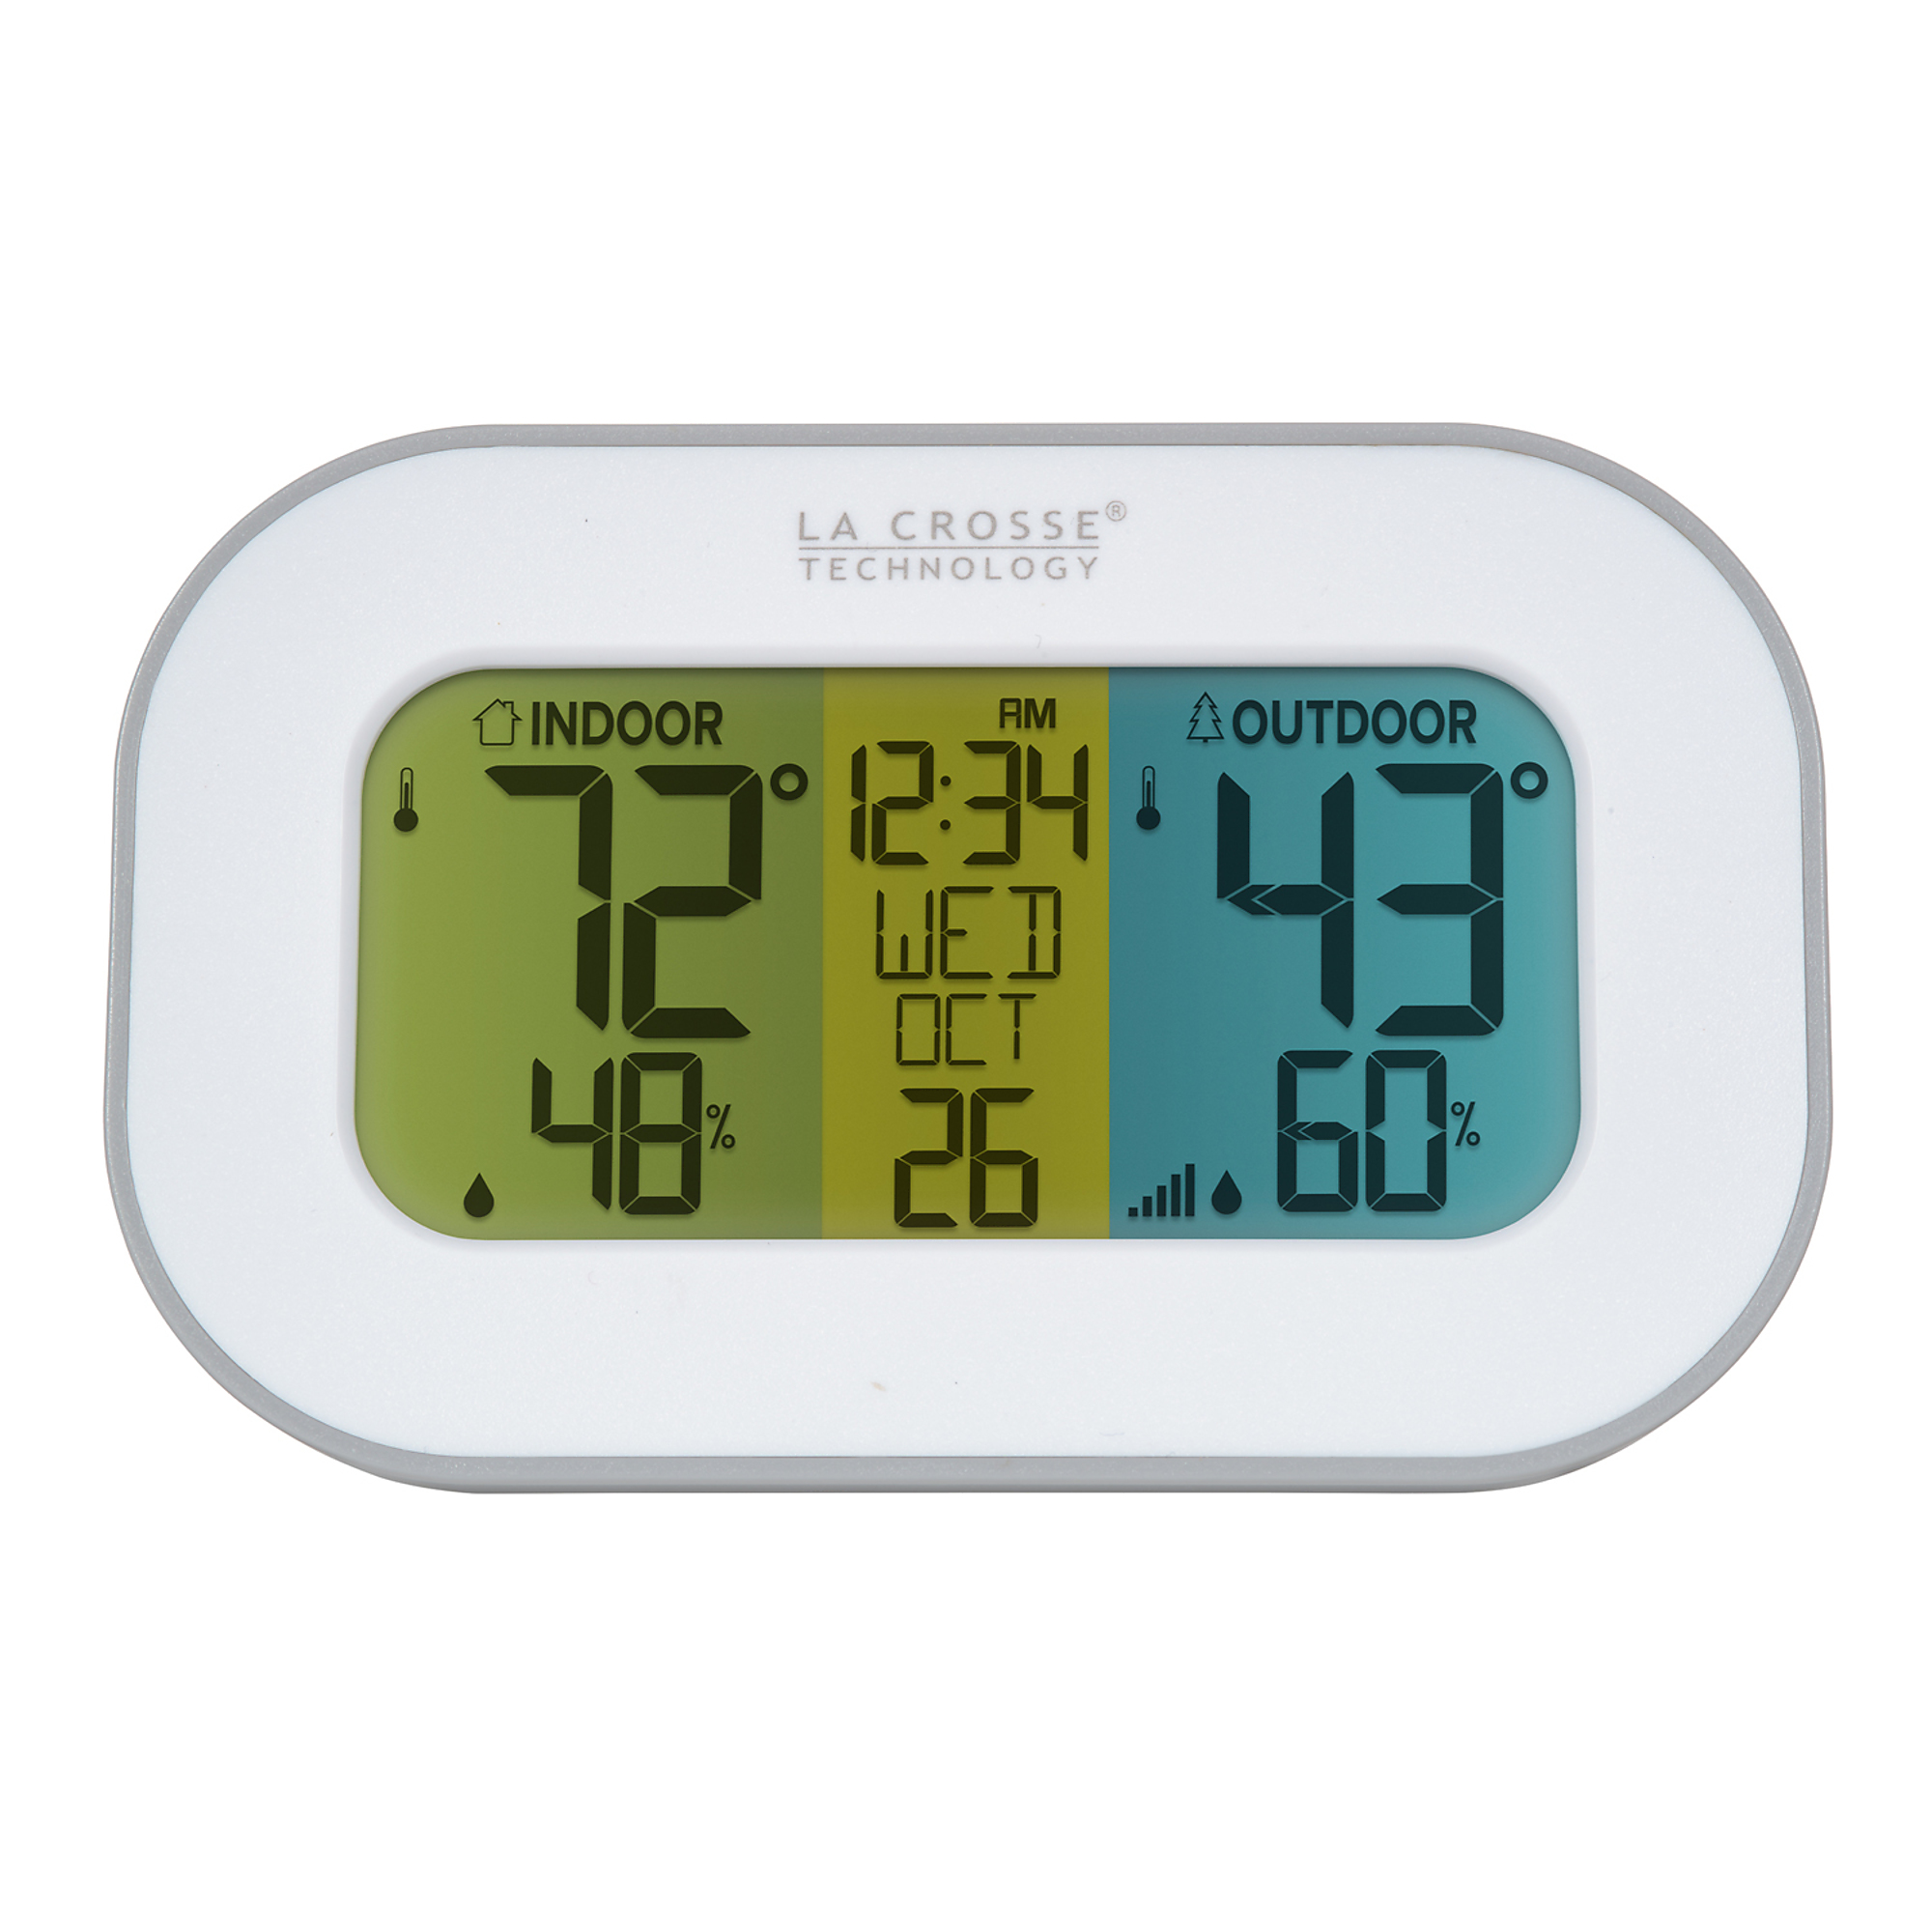 LaCrosse Technology, Wireless Temperature and Humidity Station, Display Type LCD, Model 308-148